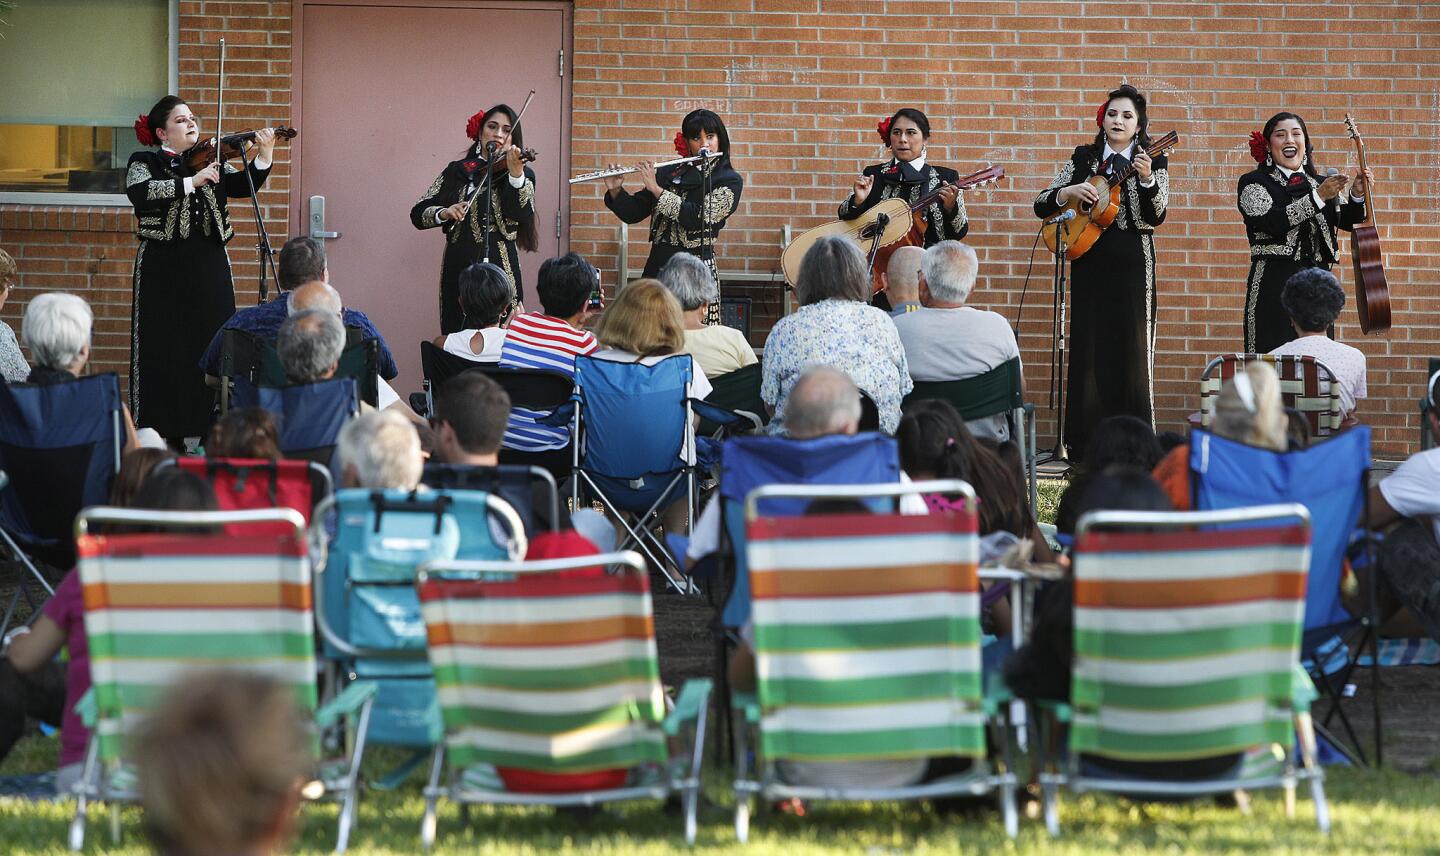 The Mariachi Divas de Cindy Shea perform for the last summer concert of the season at the Northwest Branch Library in Burbank on Wednesday, August 1, 2018. The Grammy Award-winning performers are a multi-cultural, all female ensemble imbued with the unique musical flavor of Los Angeles.